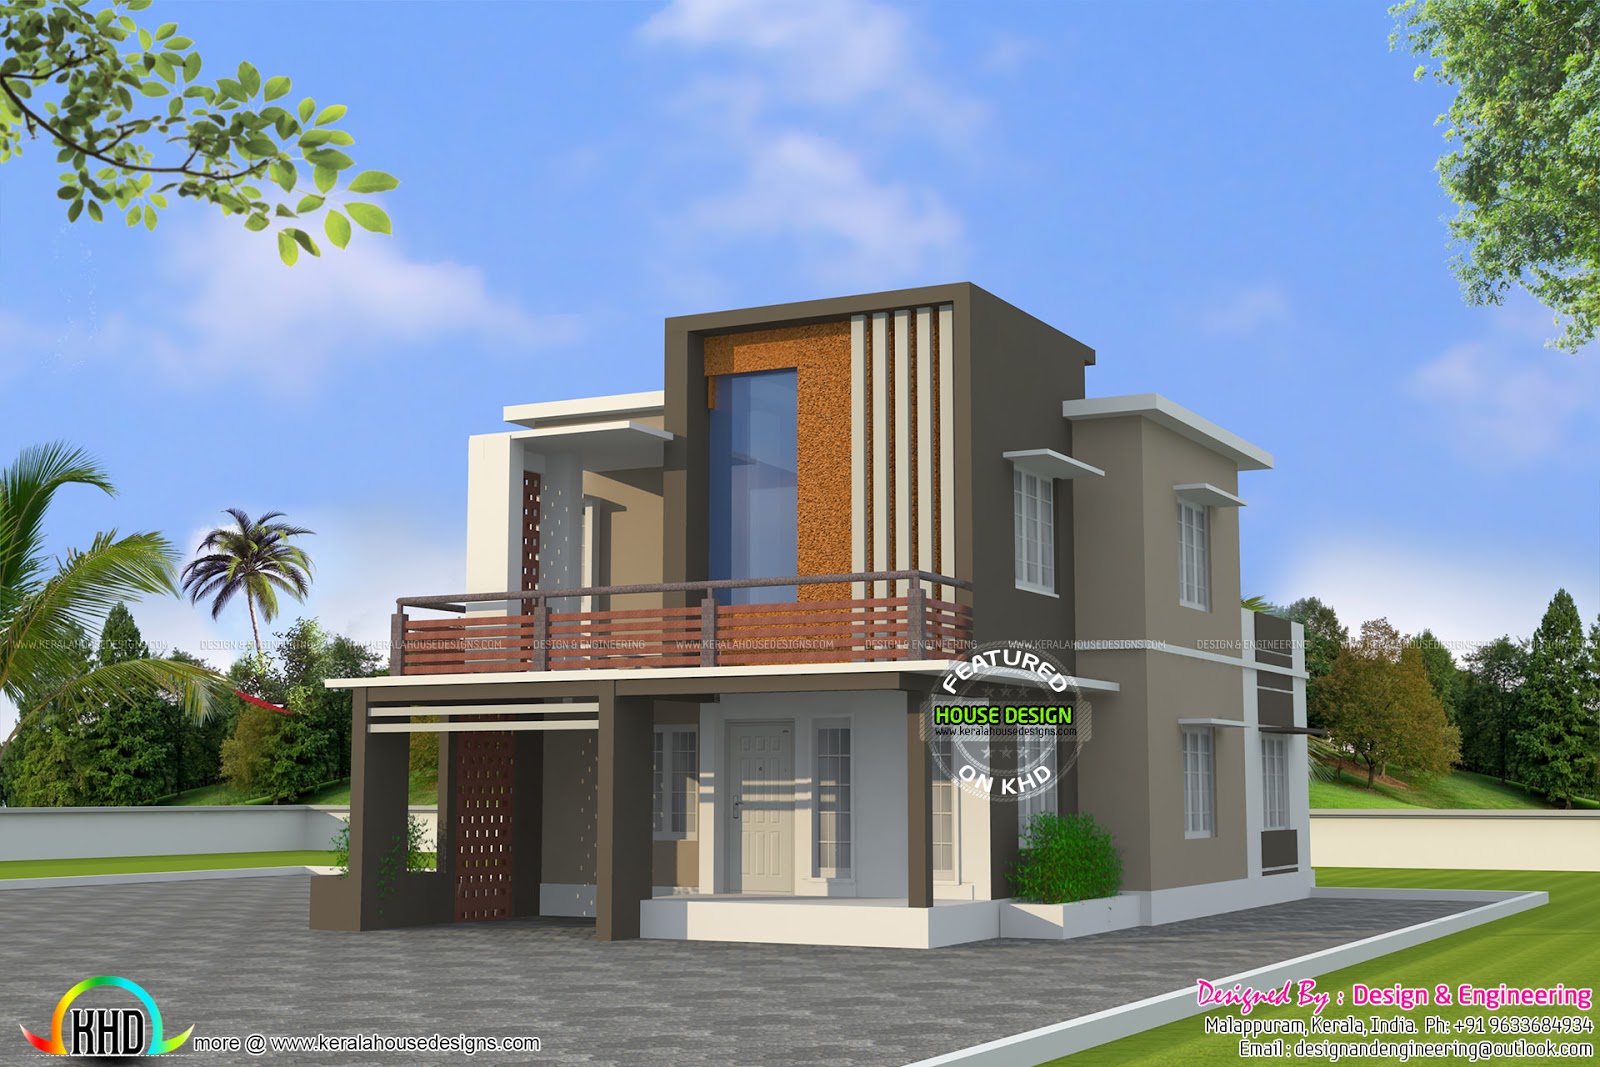  Low  cost  double floor home  plan  Kerala home  design  and 